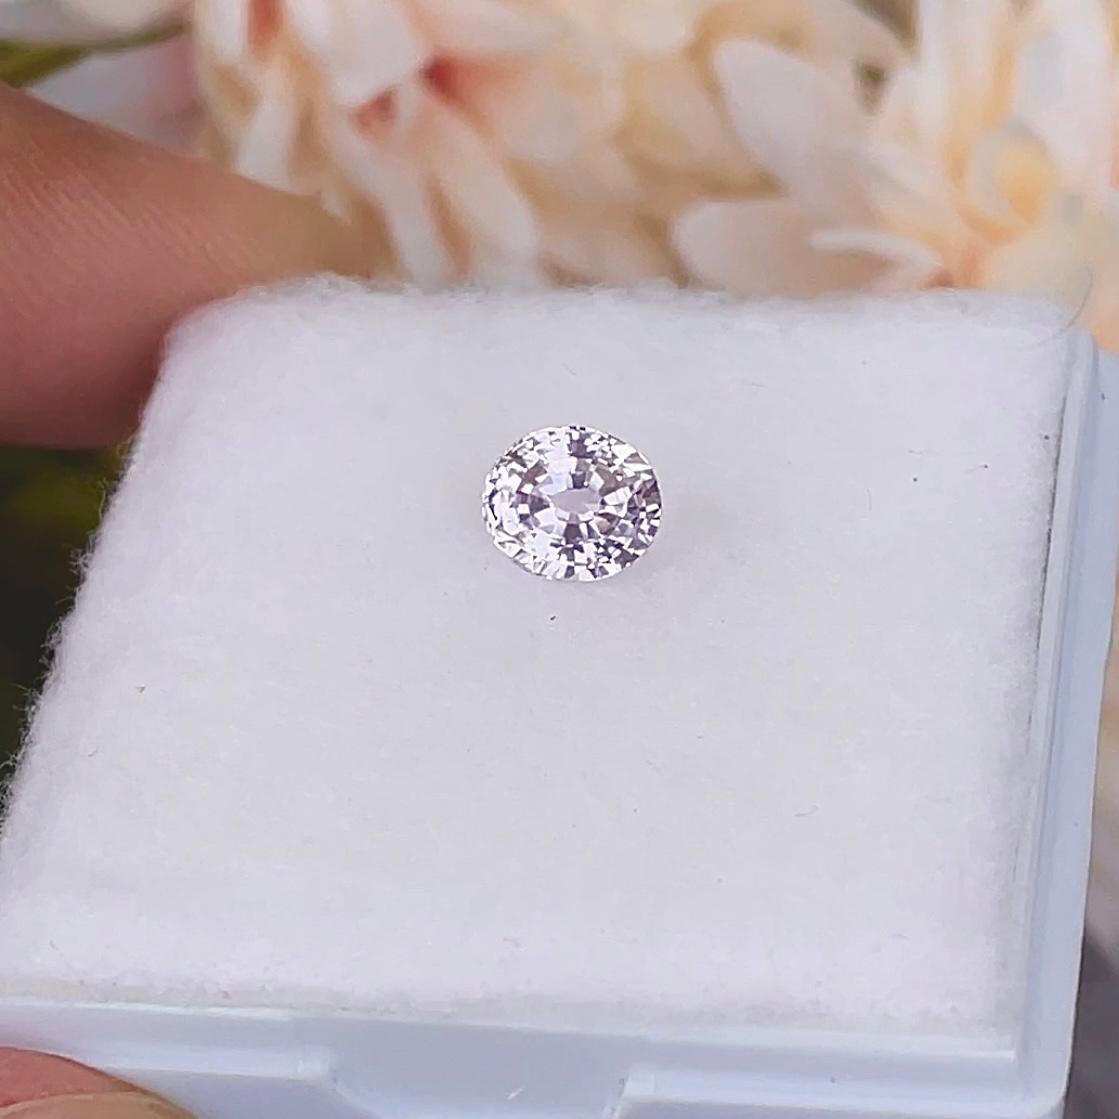 This sapphire is a reminder of all the beautiful moments that makes you blush.
A earth mined natural sapphire with an elegant touch of pink. The sapphire has a brilliant sparkle in sunlight and sweet pink color in shade. Usually pink sapphires are